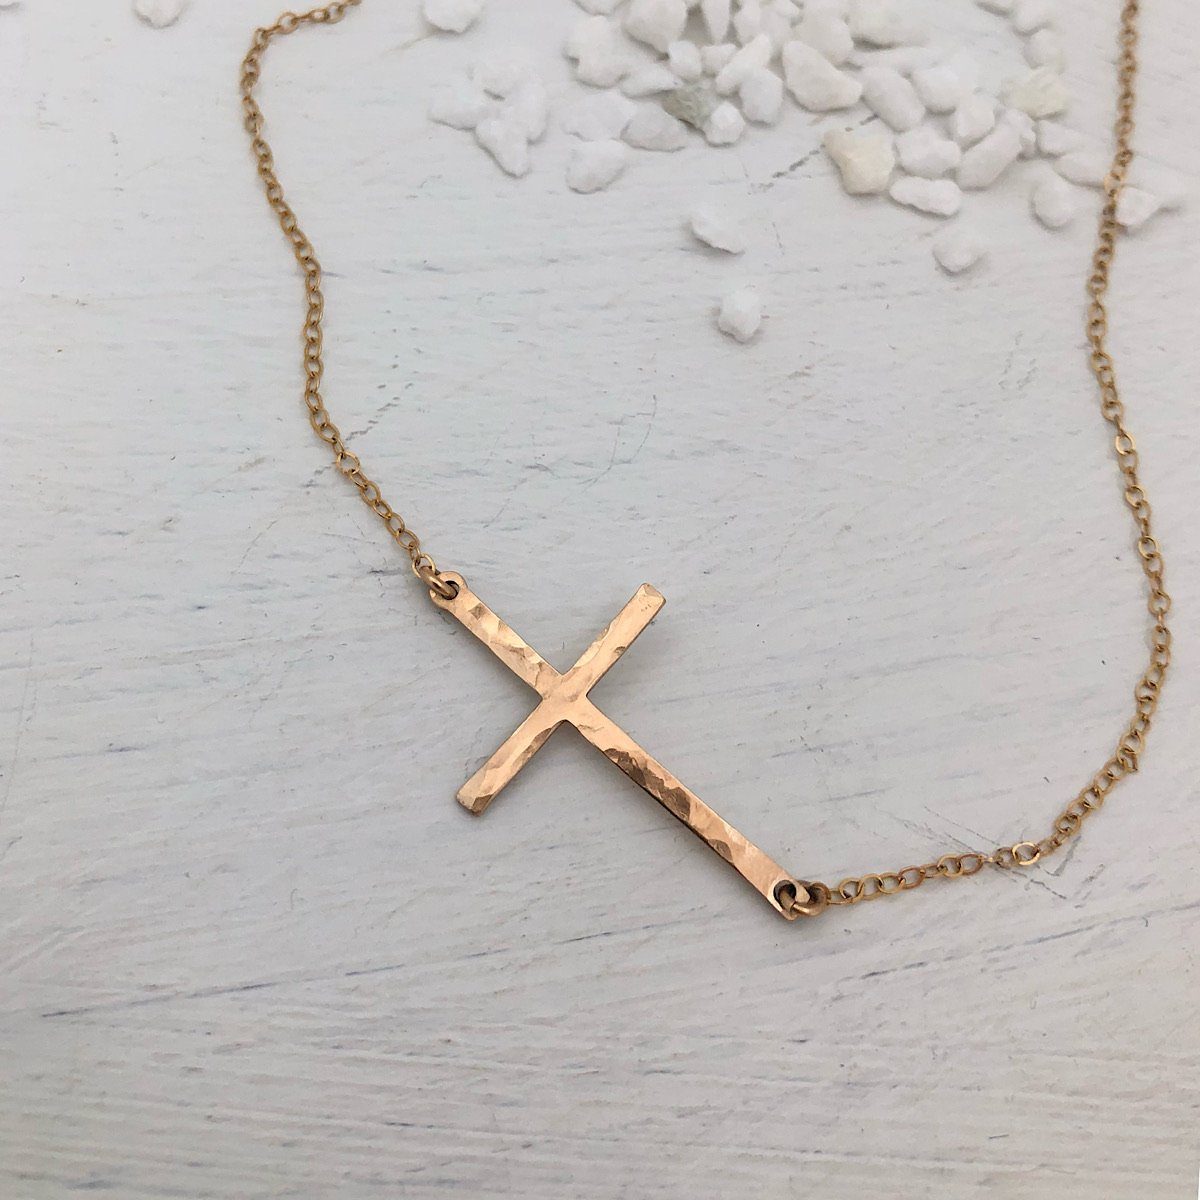 Buy Turandoss Cross Necklace for Women - 14K Gold Filled Small Cross Pendant  Simple Sideways Cross Necklace for Women Jewelry Gifts 14 16 Inches Chain  Gold/White God/Rose Gold, Metal at Amazon.in